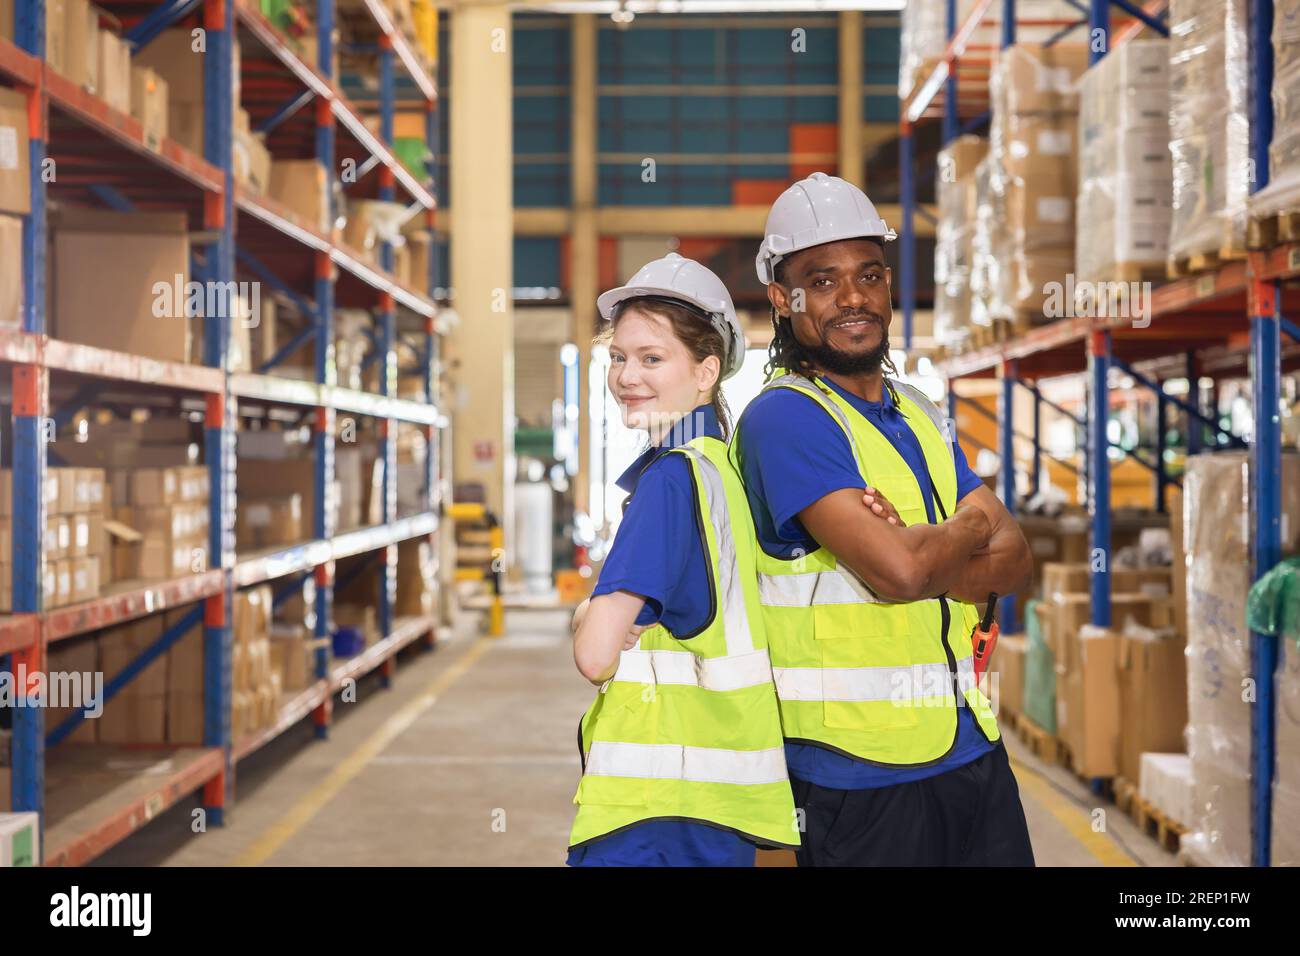 warehouse worker team portrait multiracial standing together happy smiling for industry labor enjoy working teamwork Stock Photo